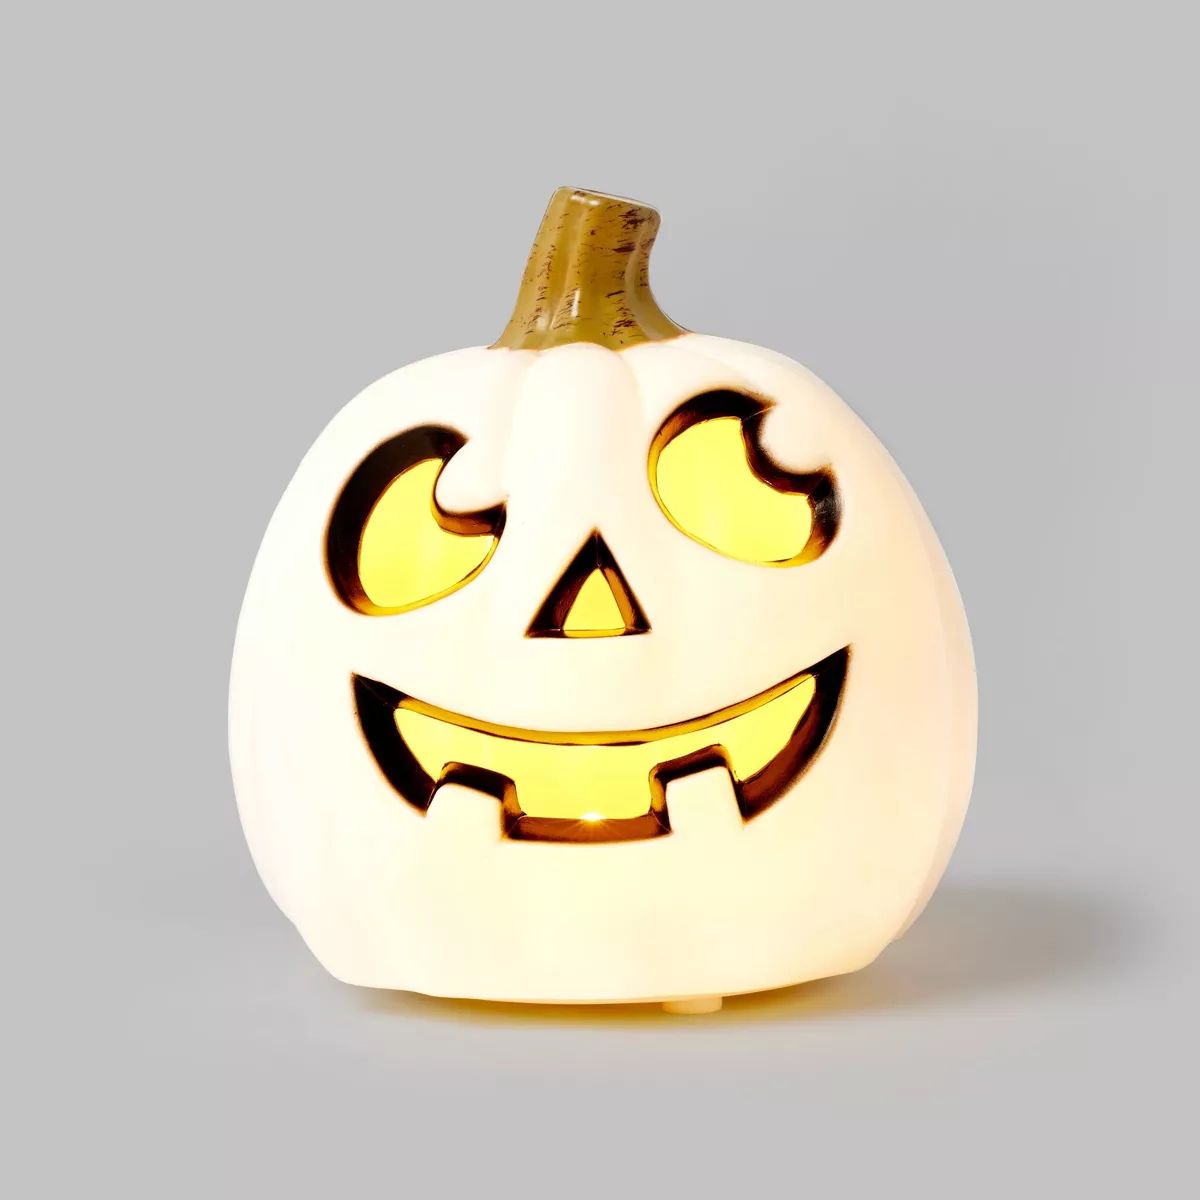 5" Light Up Pumpkin with Happy Face White Halloween Decorative Prop - Hyde & EEK! Boutique™ | Target